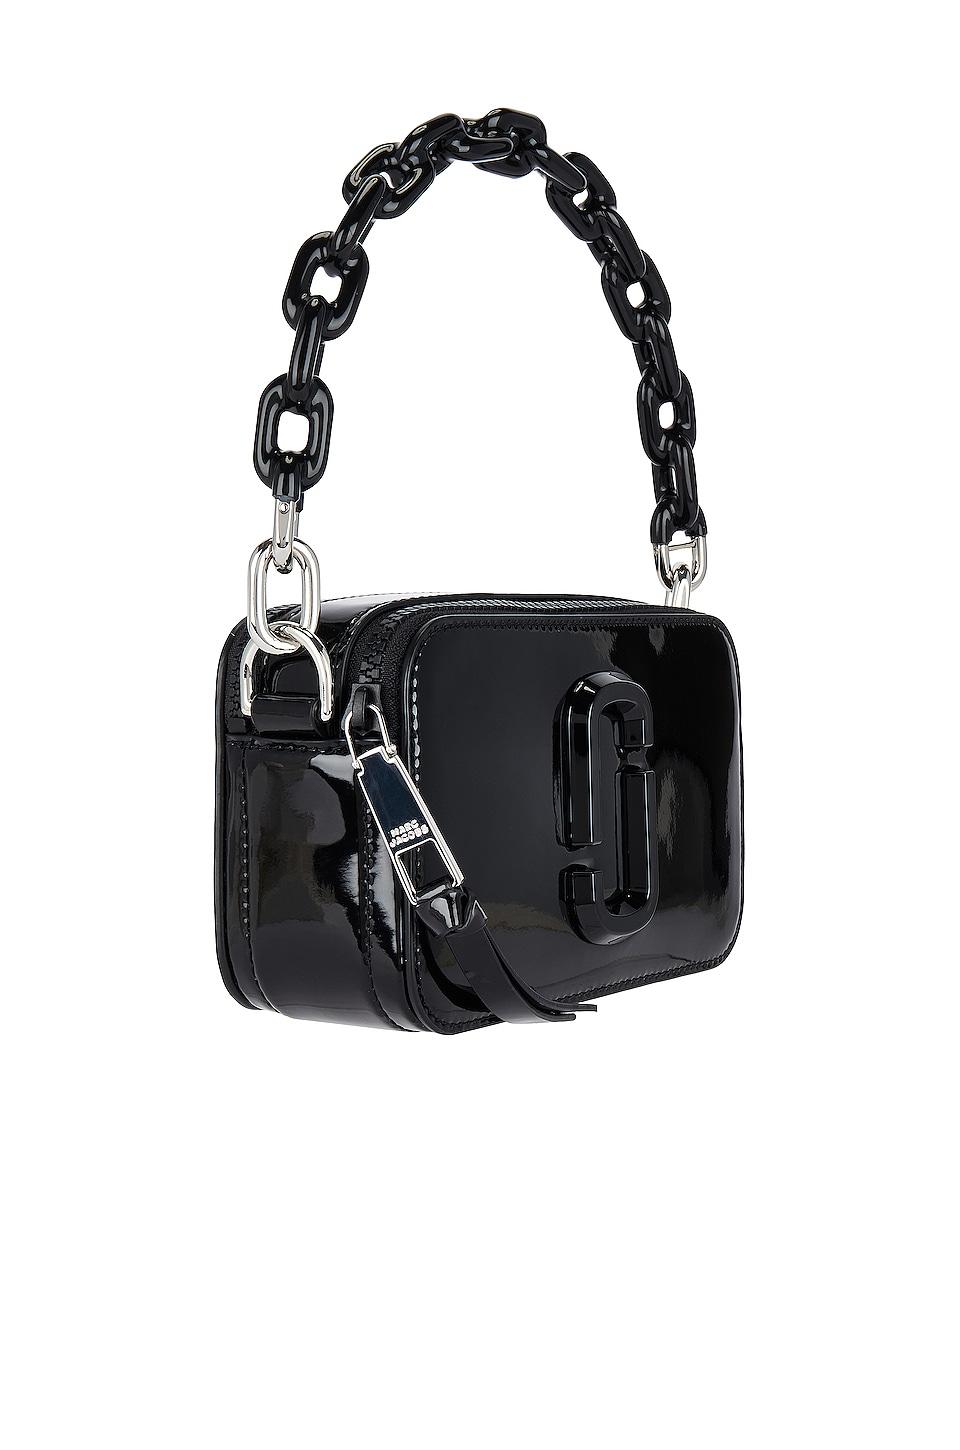 Snapshot leather crossbody bag Marc Jacobs Black in Leather - 19153551